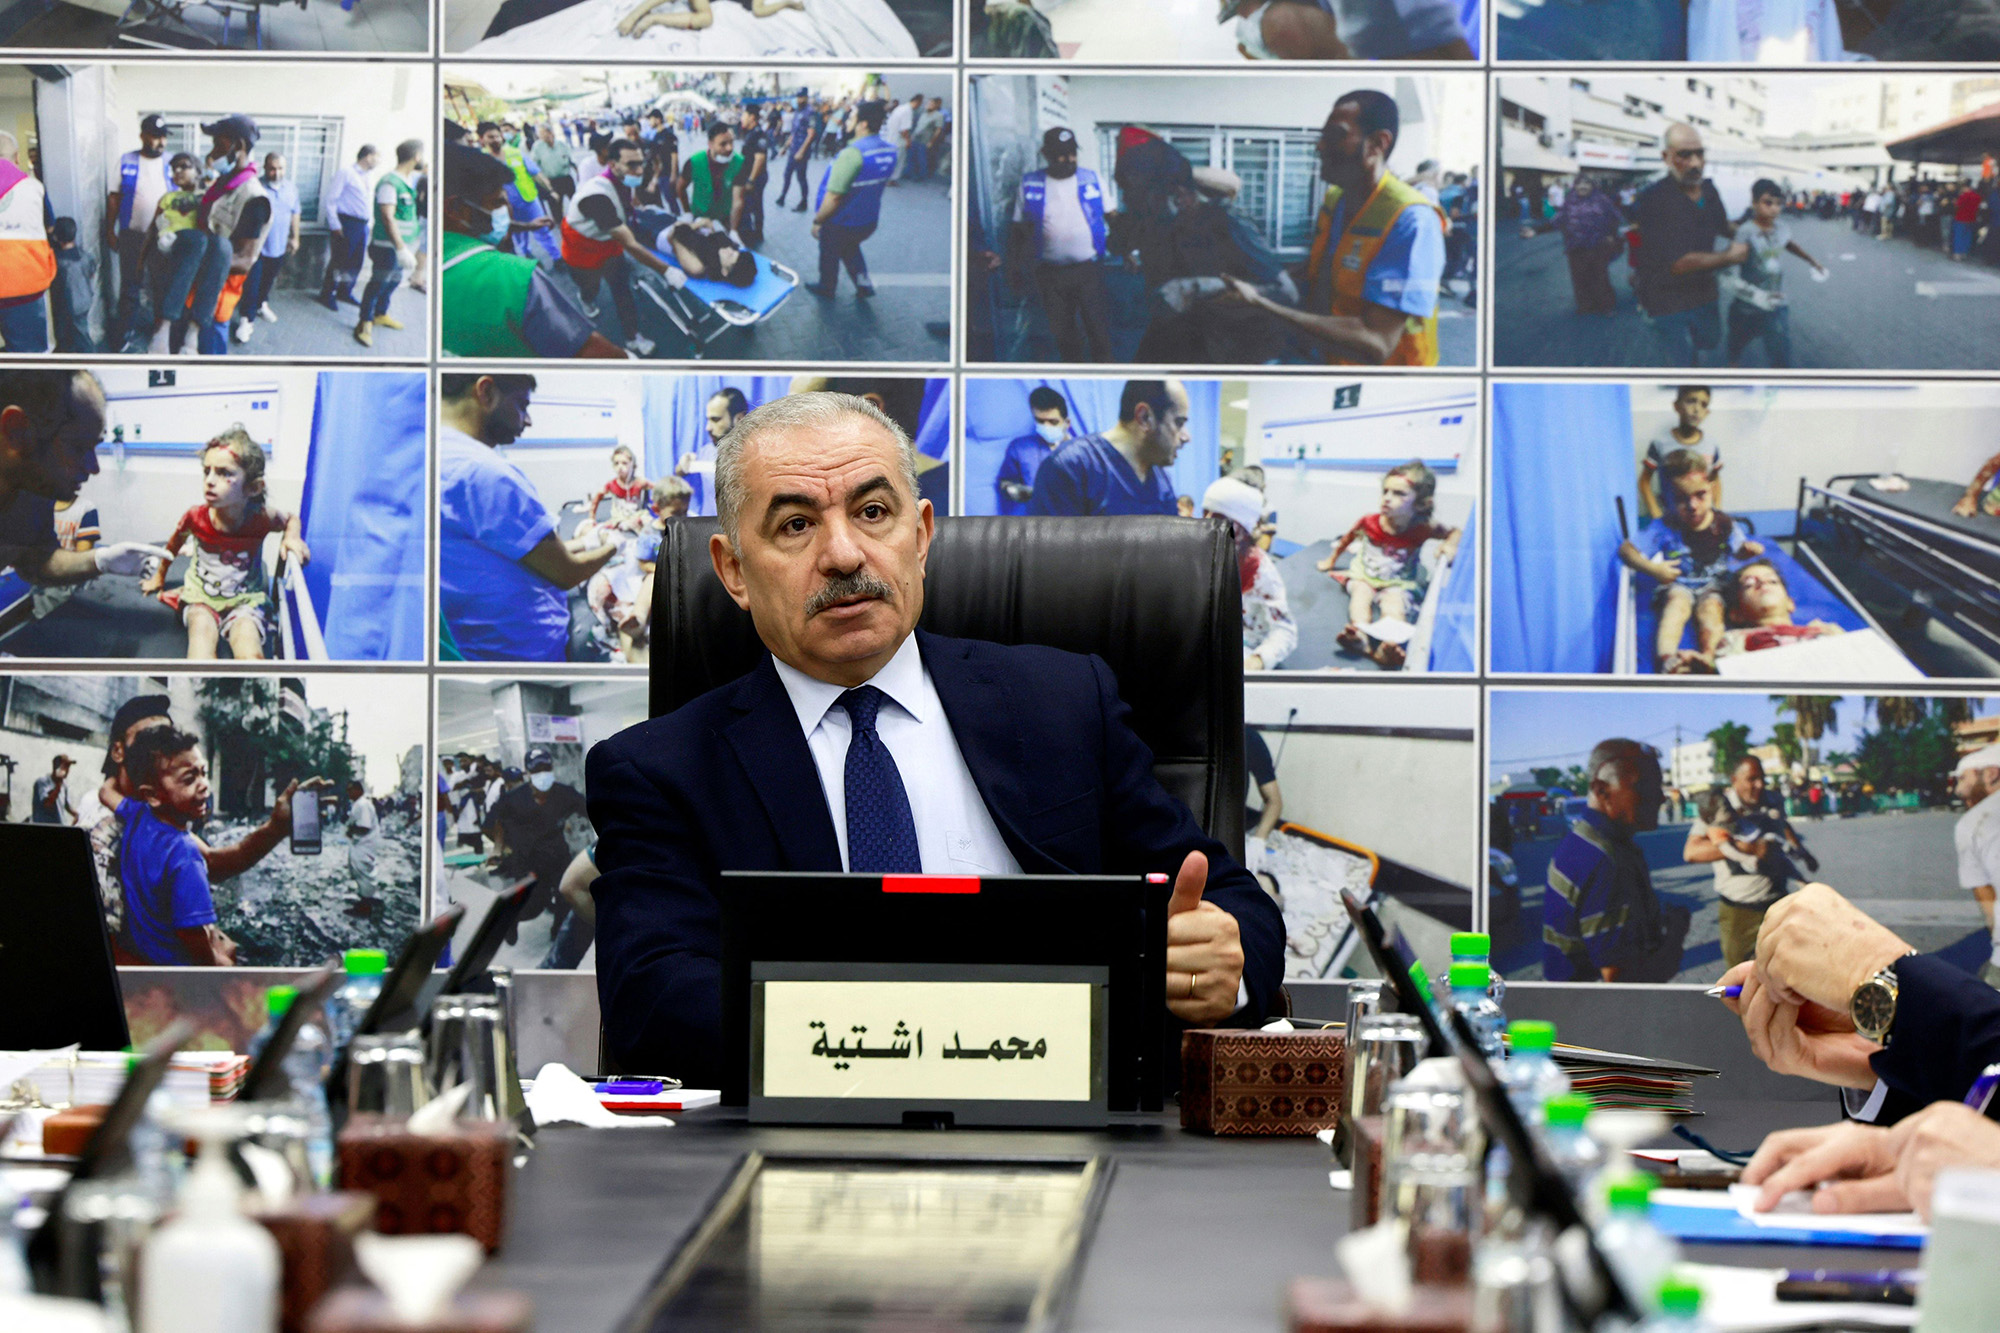 Palestinian prime minister Mohammad Shtayyeh attends during a cabinet meeting in the West Bank city of Ramallah on October 16.